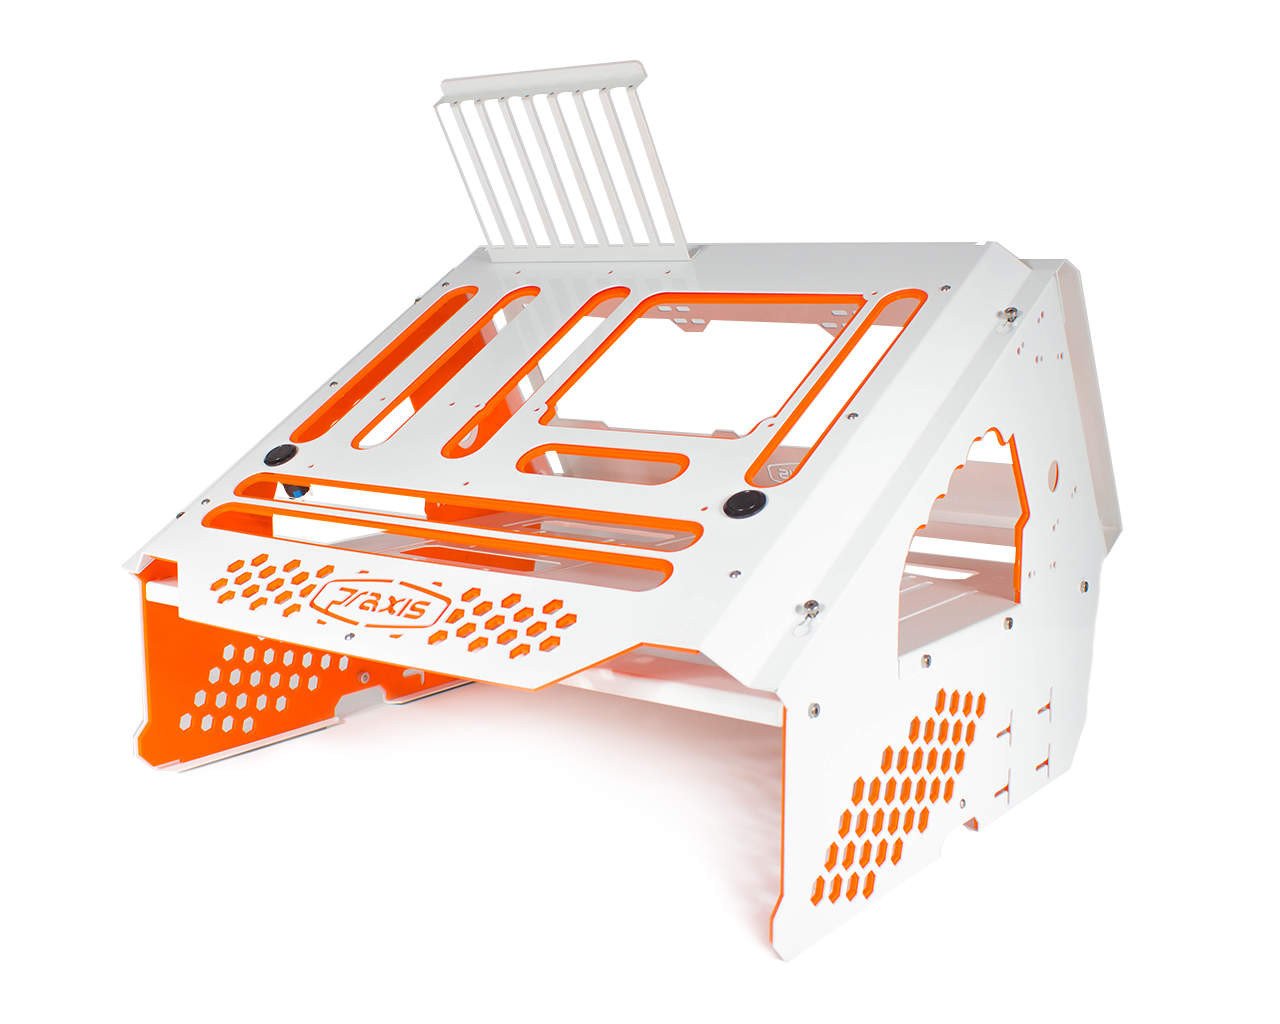 PrimoChill's Praxis Wetbench Powdercoated Steel Modular Open Air Computer Test Bench for Watercooling or Air Cooled Components - PrimoChill - KEEPING IT COOL White w/Solid Orange Accents